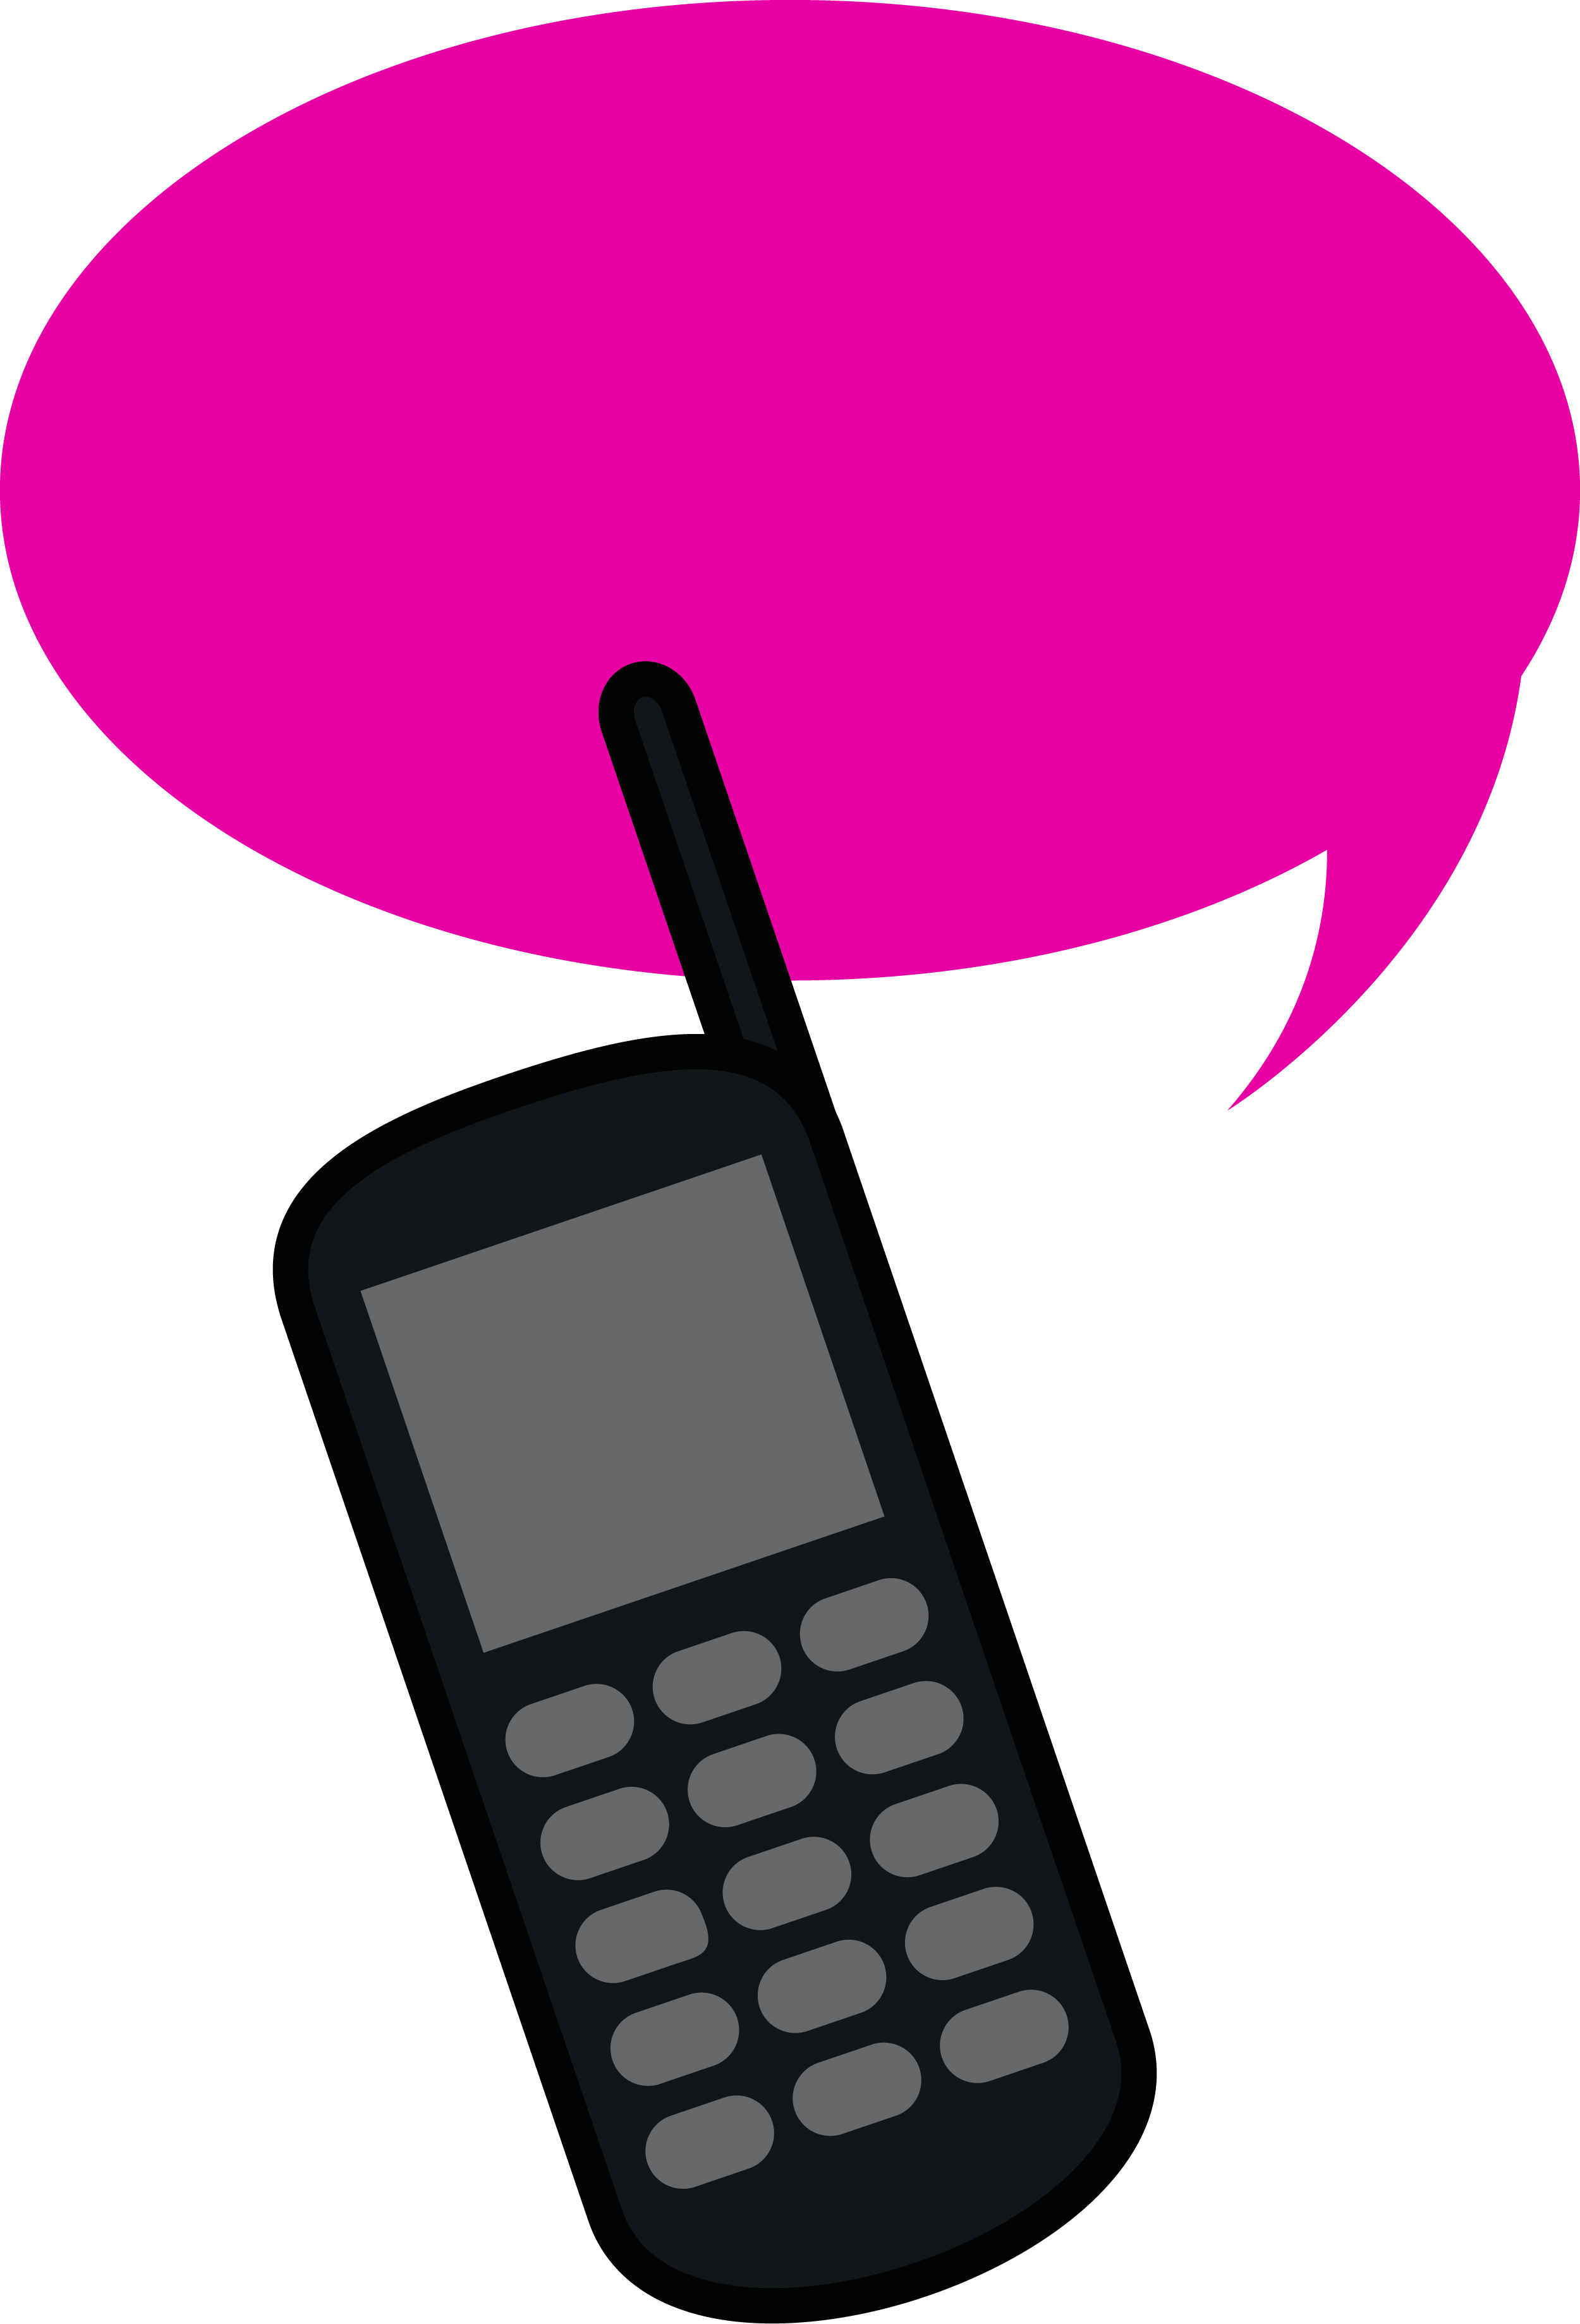 SMS Mobile Phone Message Service Contact Us Communication Gadget Retro Phone PNG Clipart